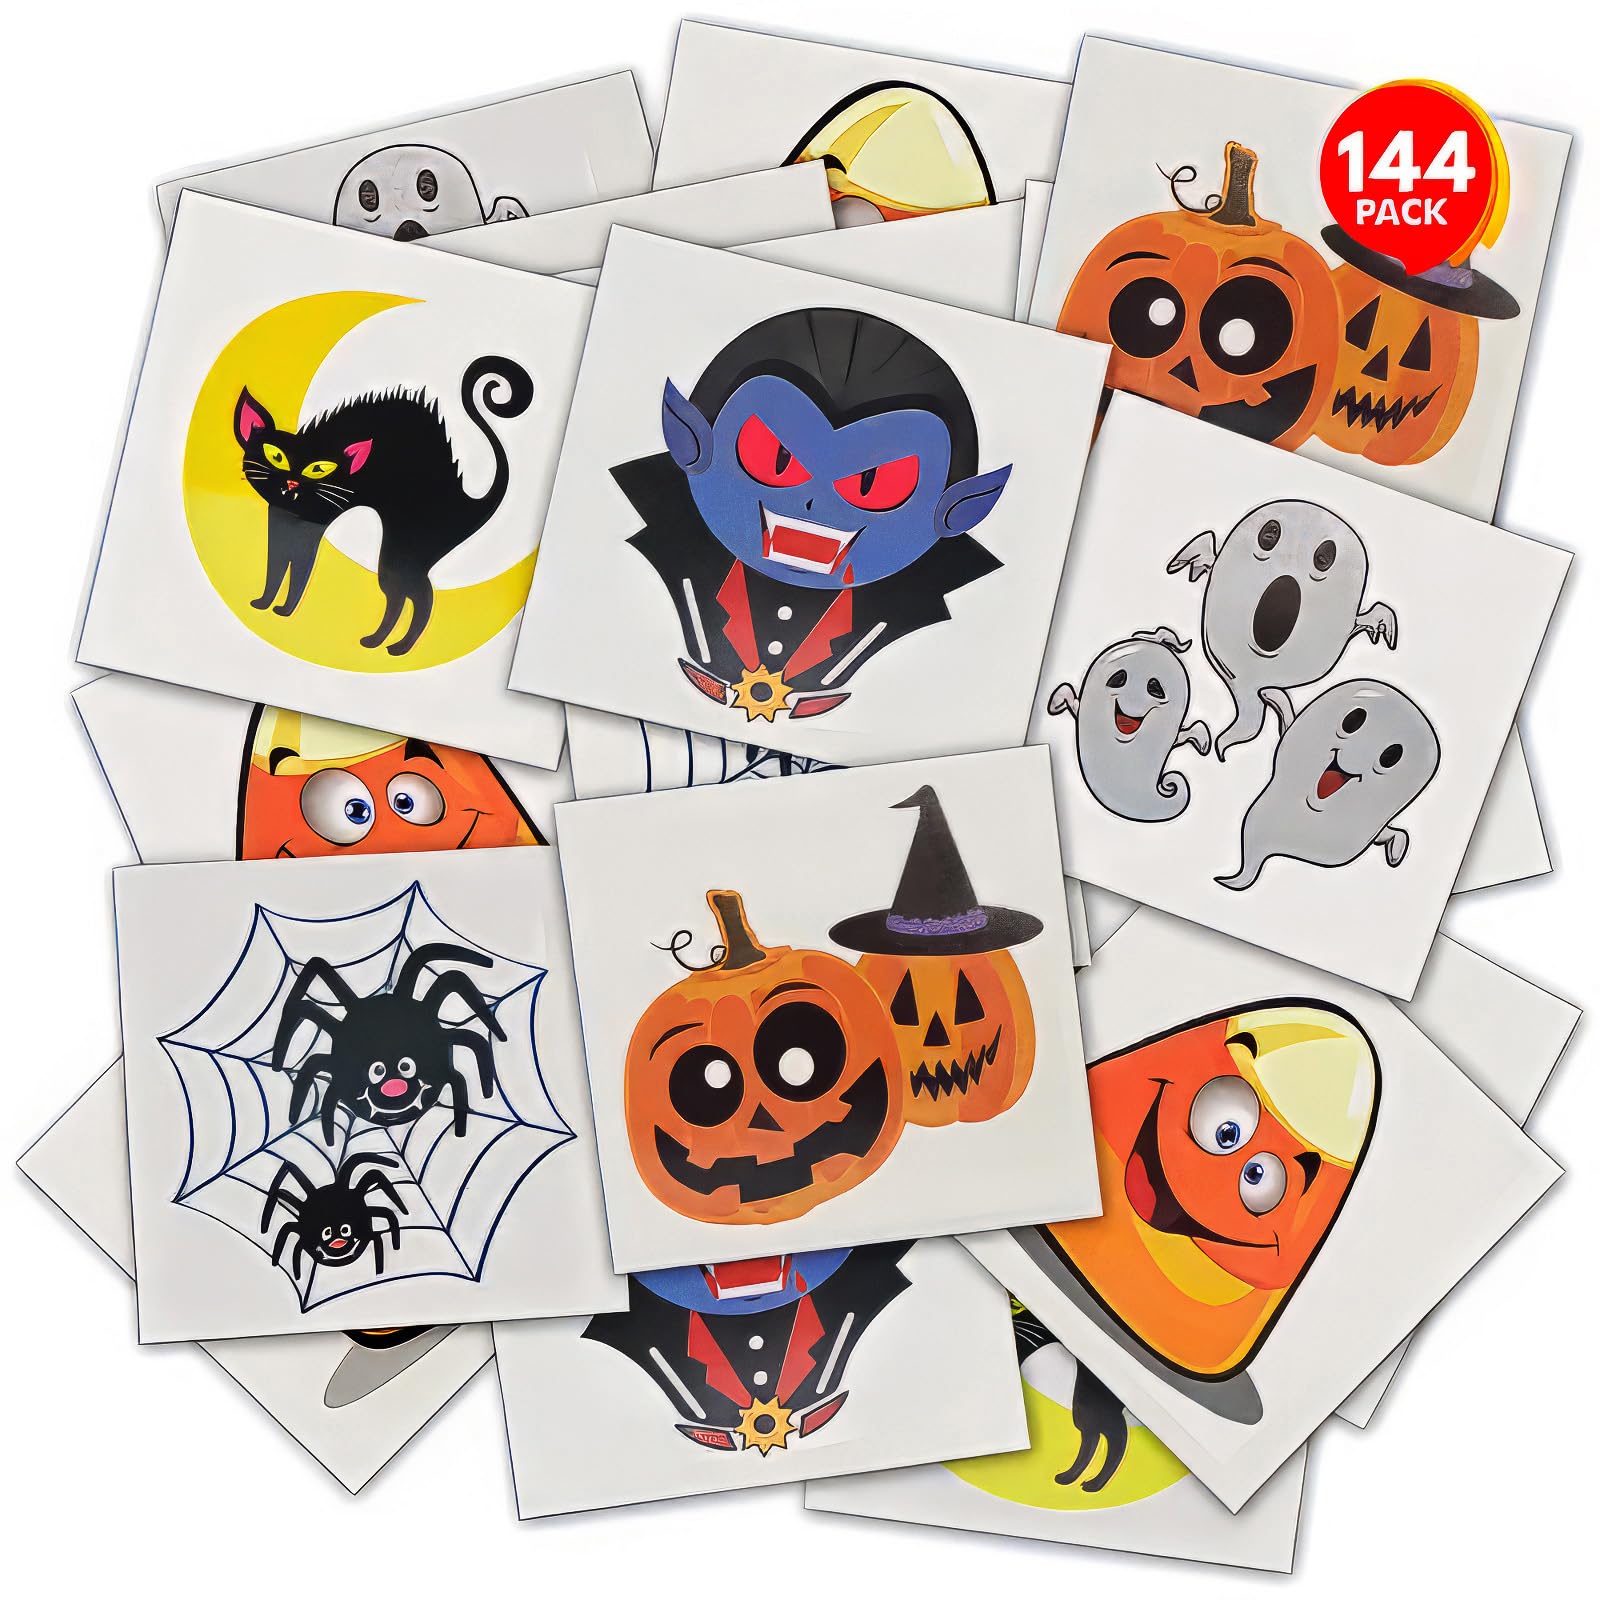 Halloween Temporary Tattoos for Kids - Pack of 144 (with promo) $5.99